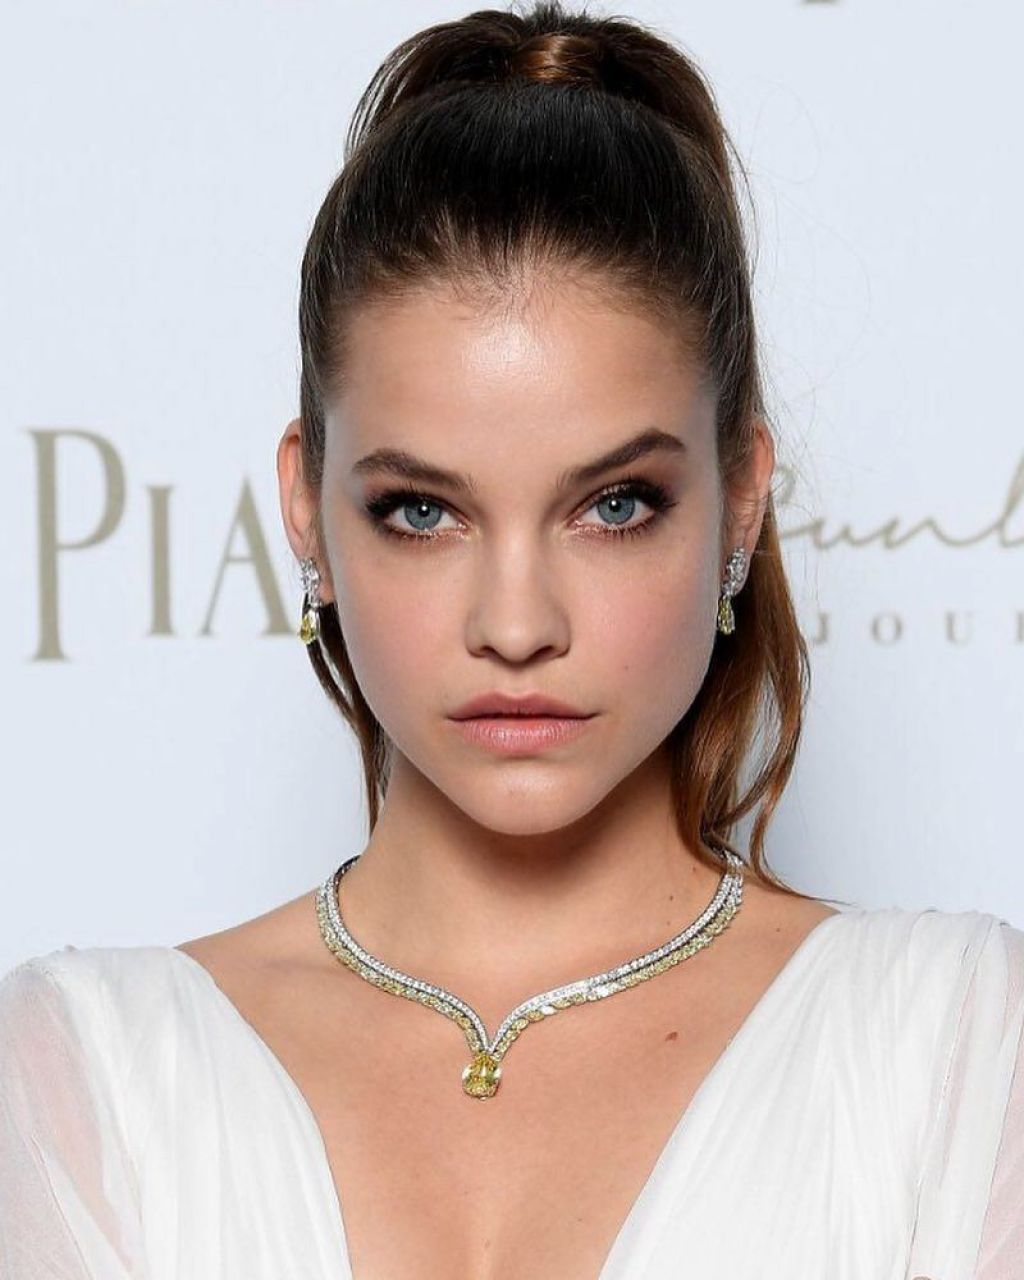 barbara-palvin-piaget-sunlight-journey-collection-launch-in-rome-italy-06-13-2017-2.jpg